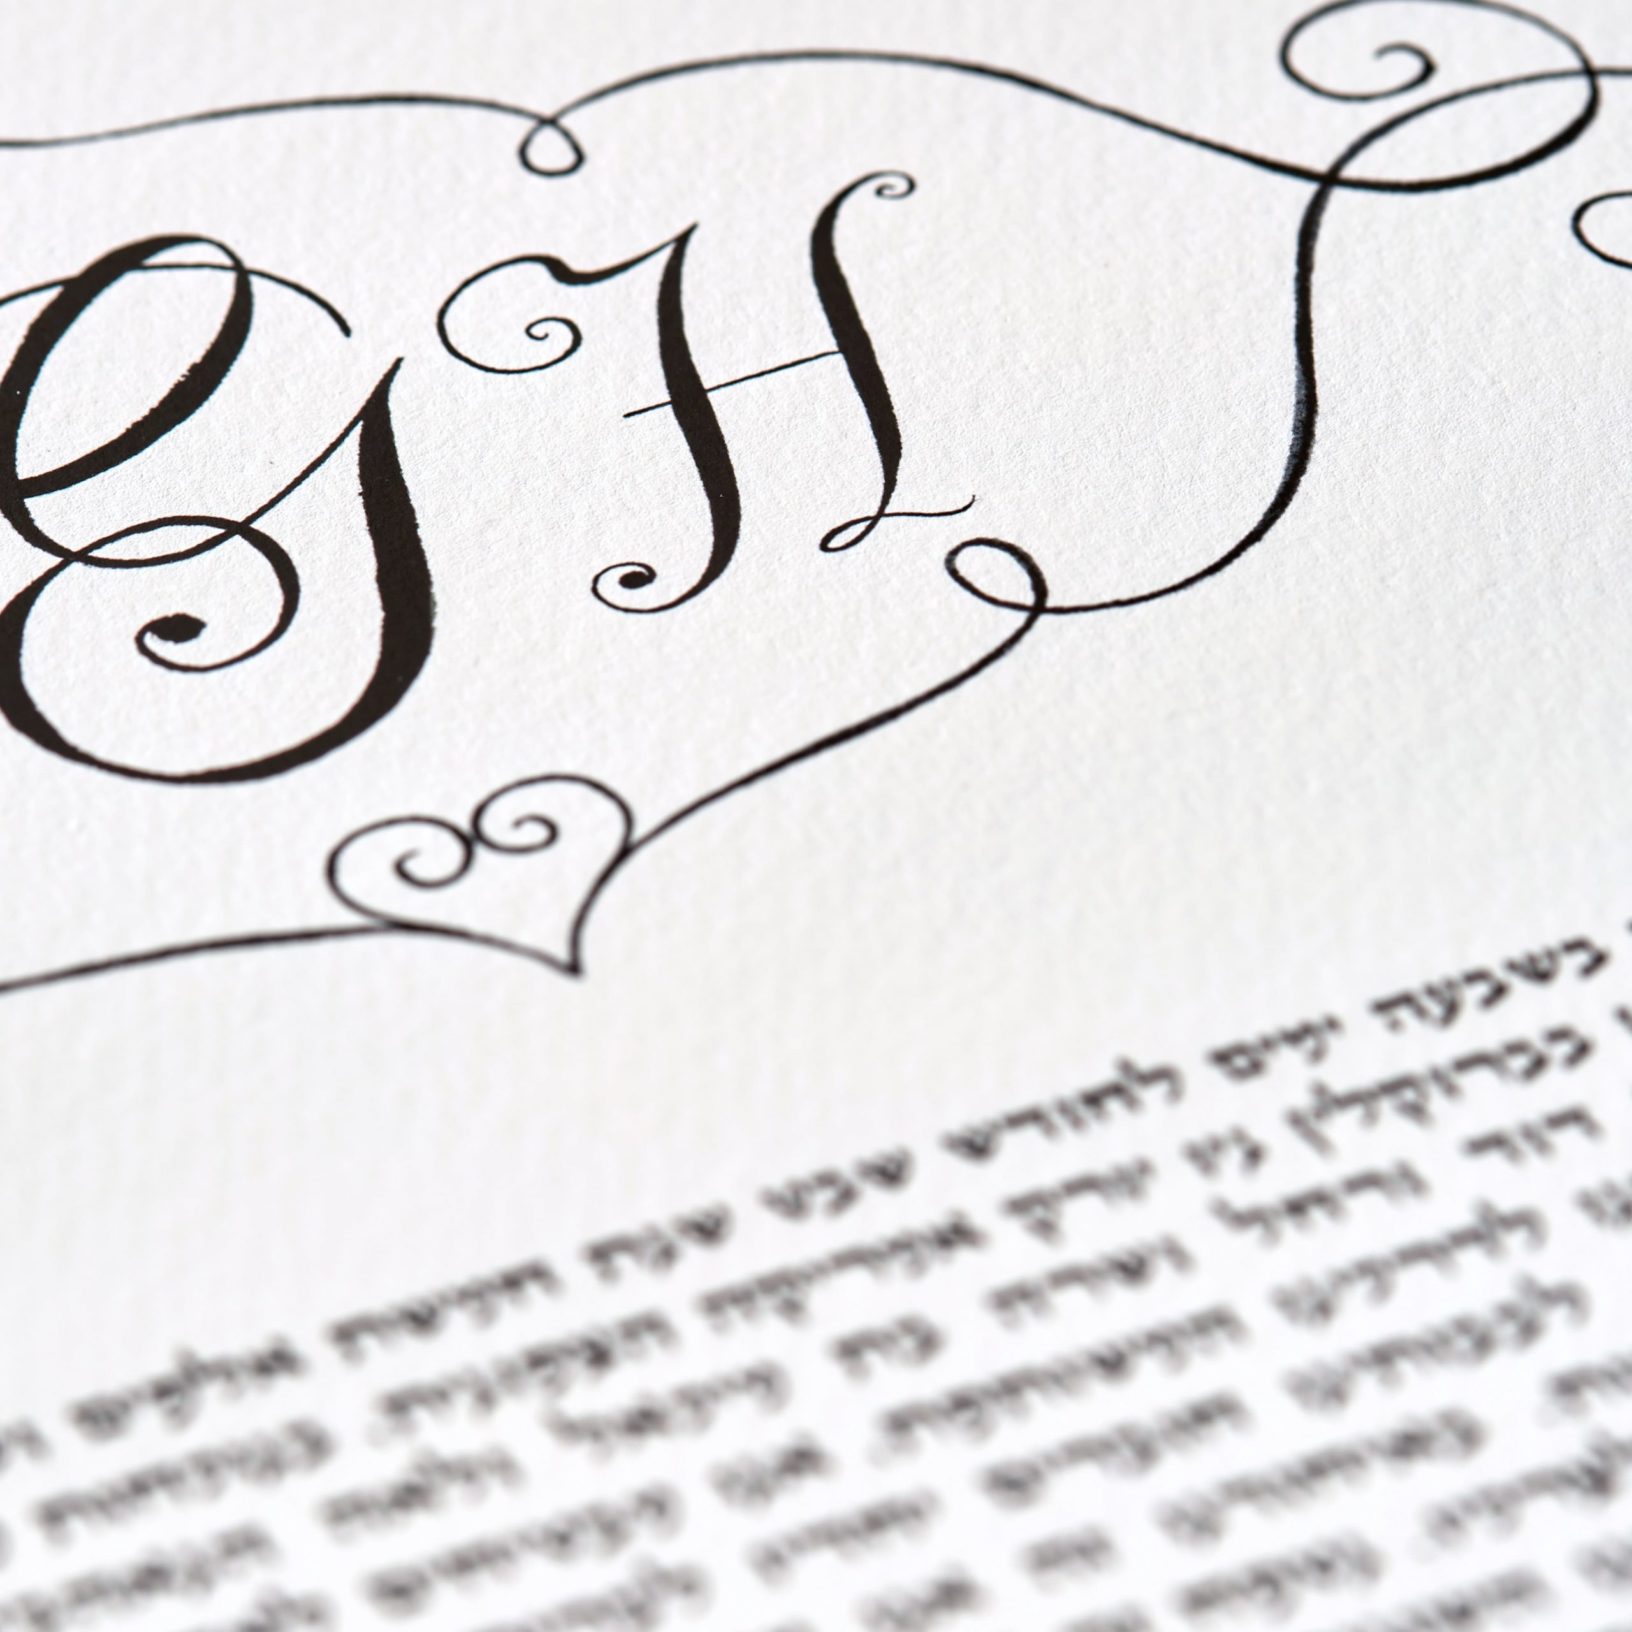 Timeless & Classic Monogram Ketubah Store by Susanne McGinnis